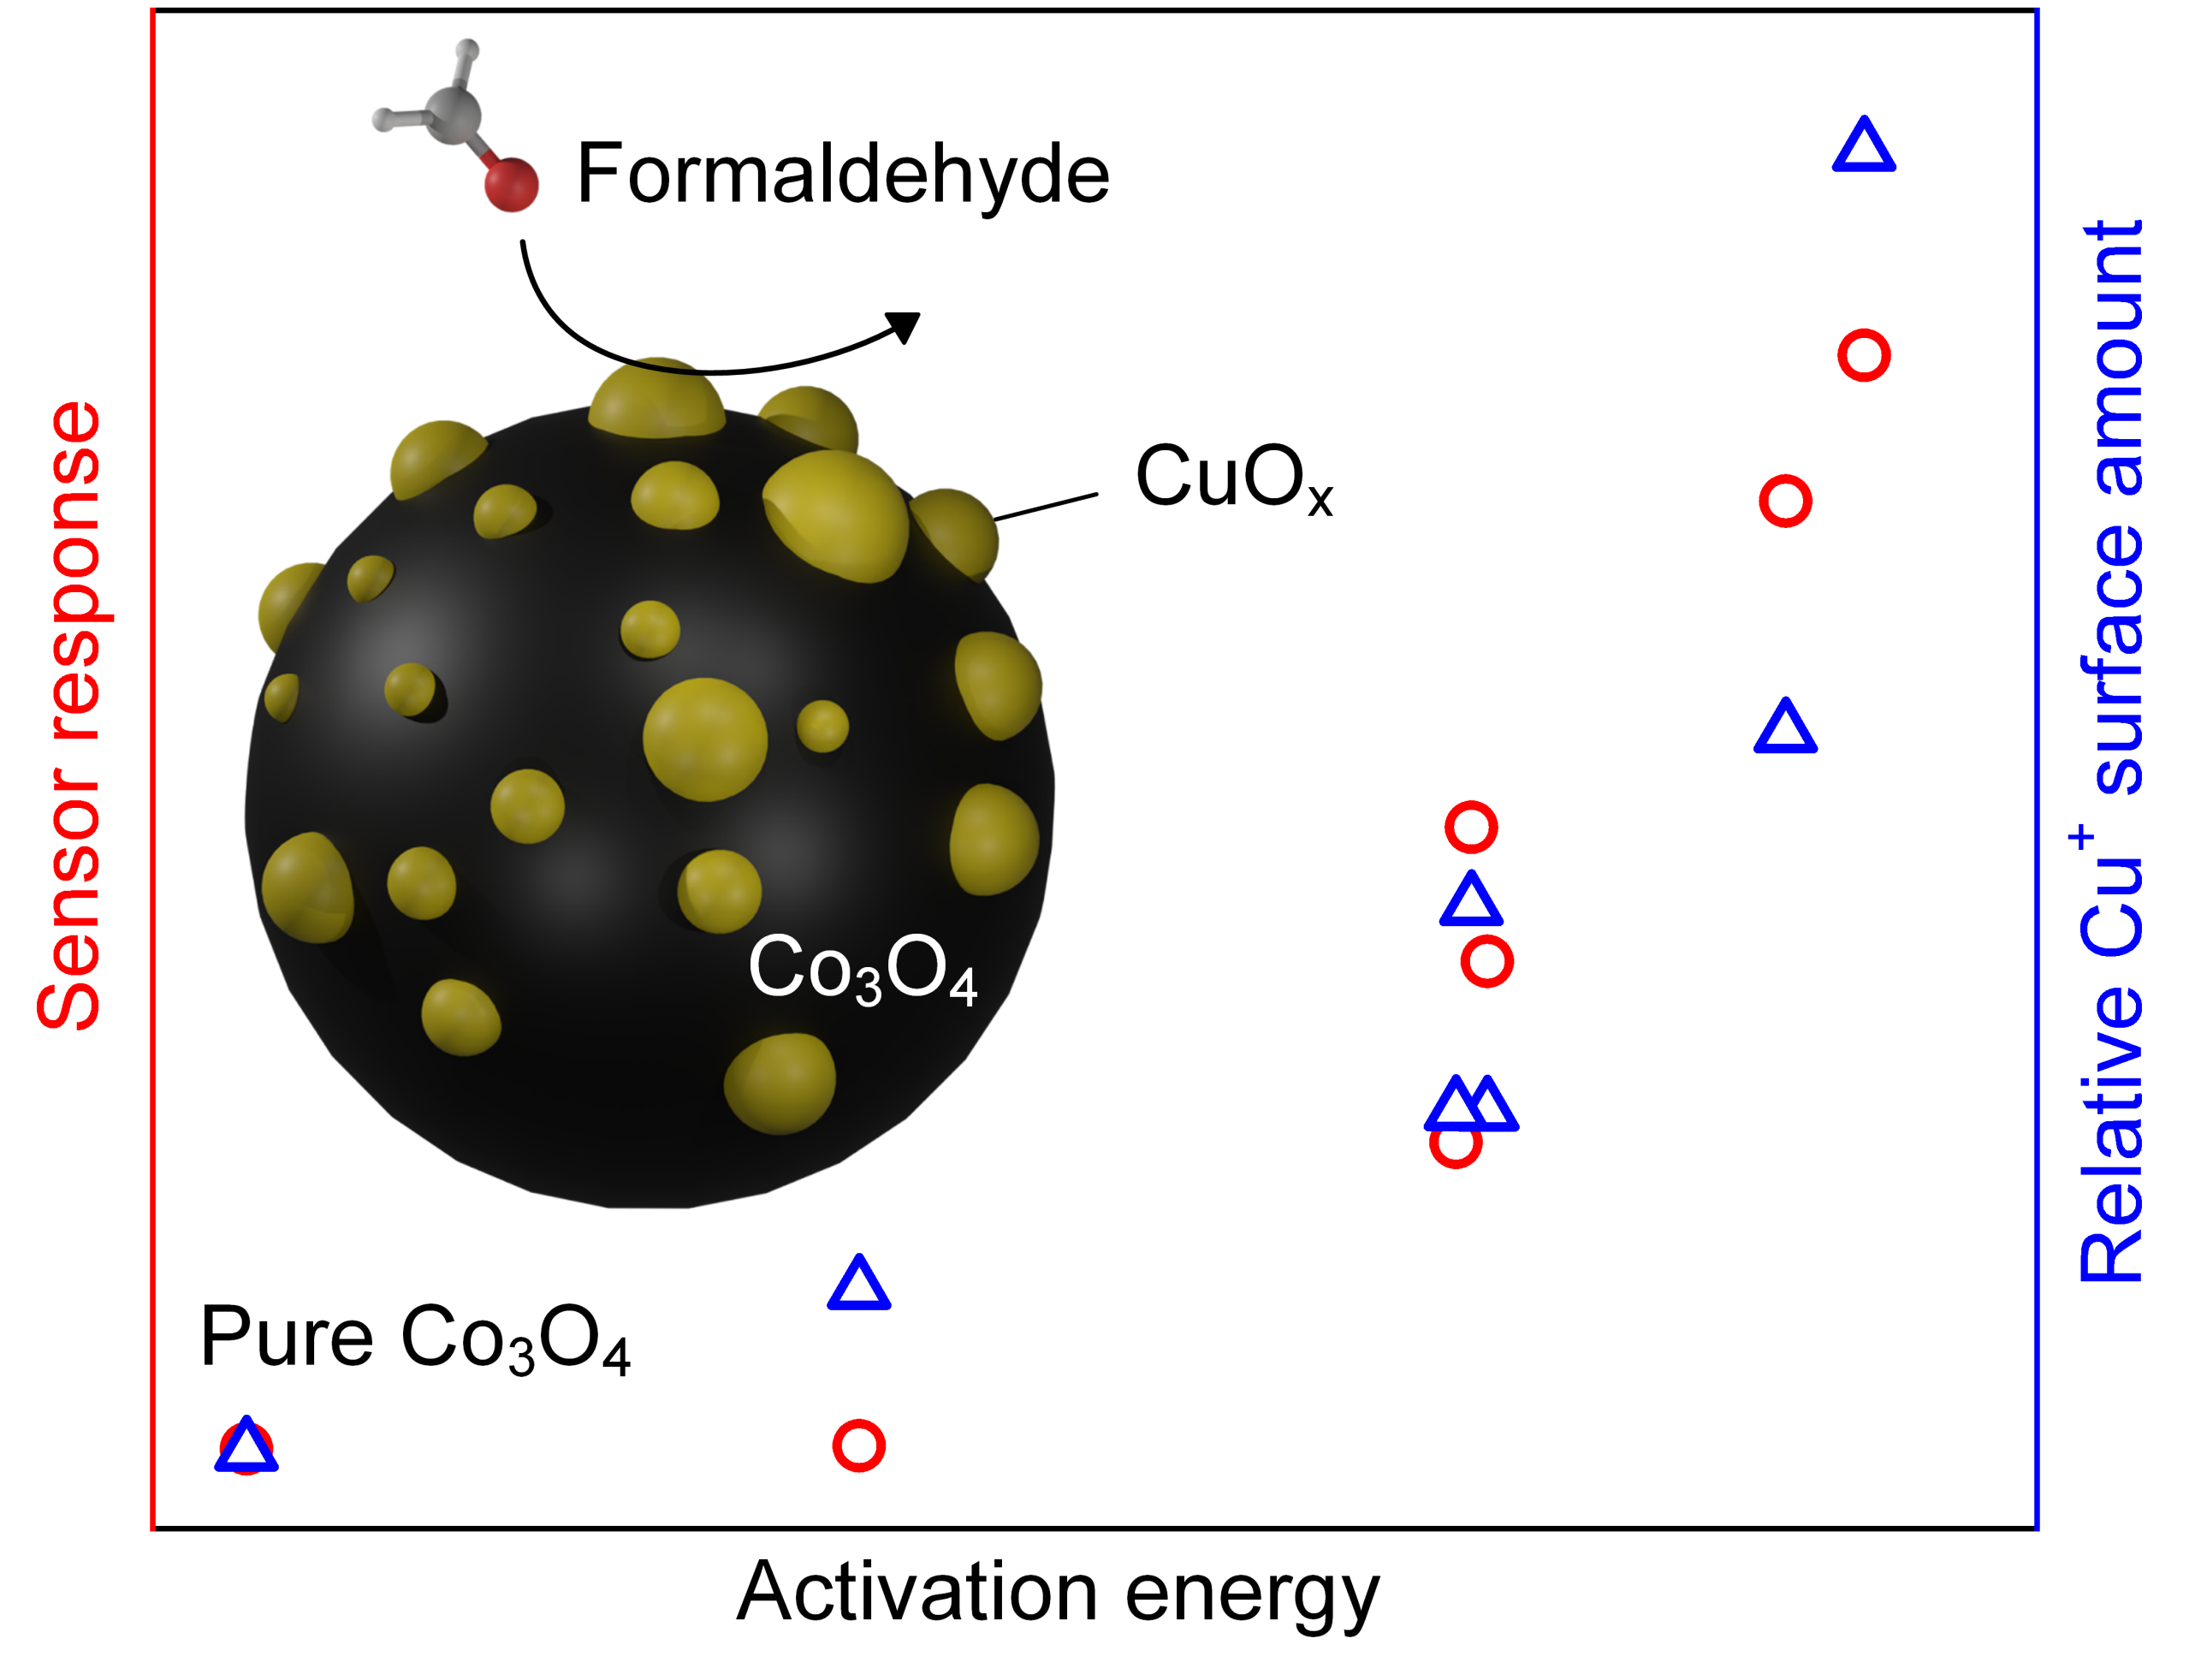 Cobalt oxide nanoparticles decorated with copper oxide